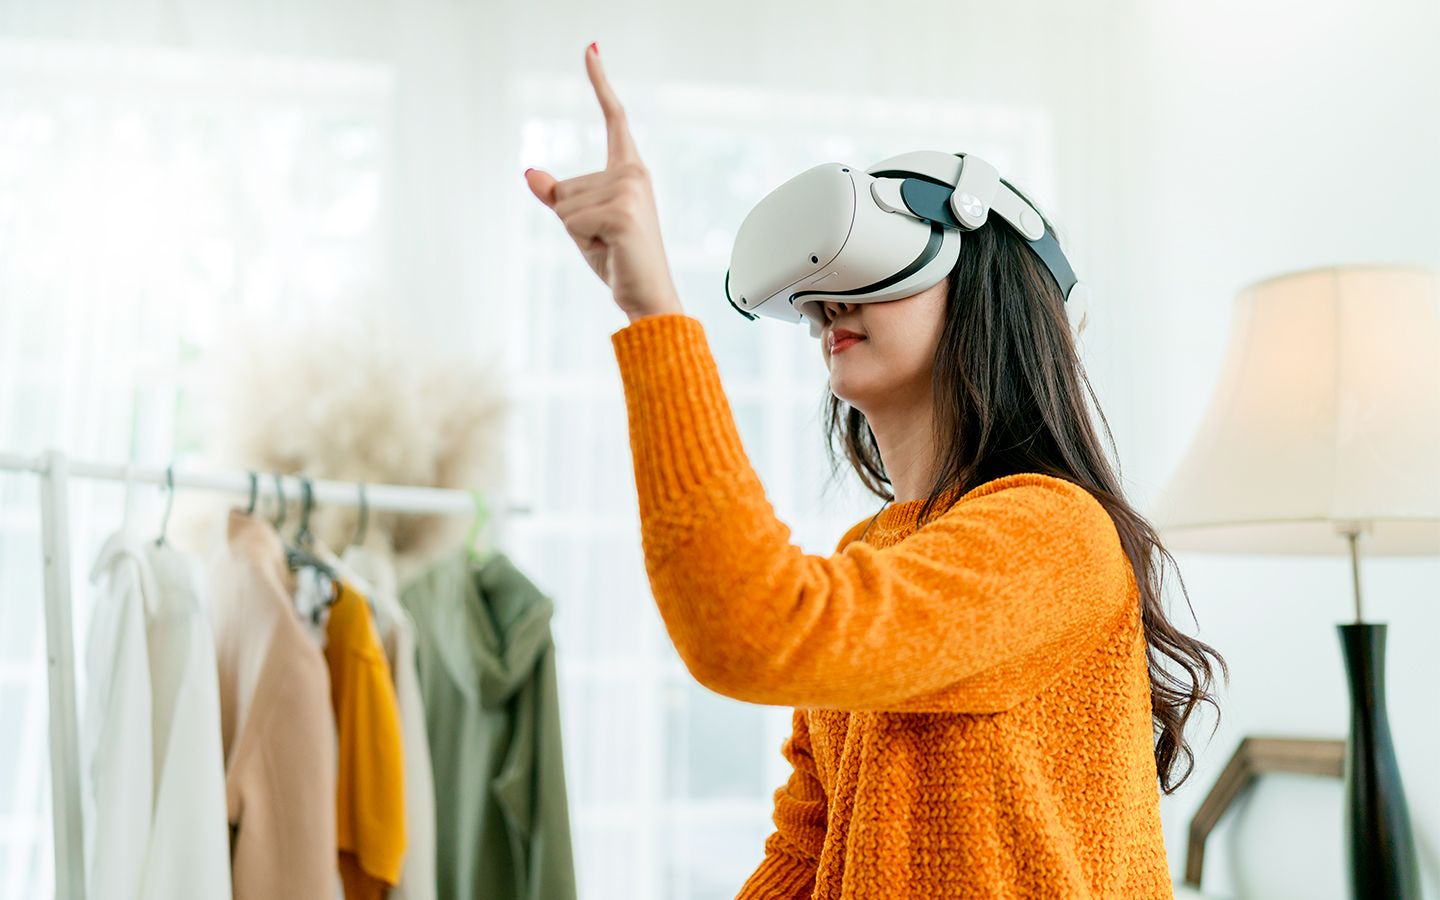 Creating Immersive Online Shopping Experiences